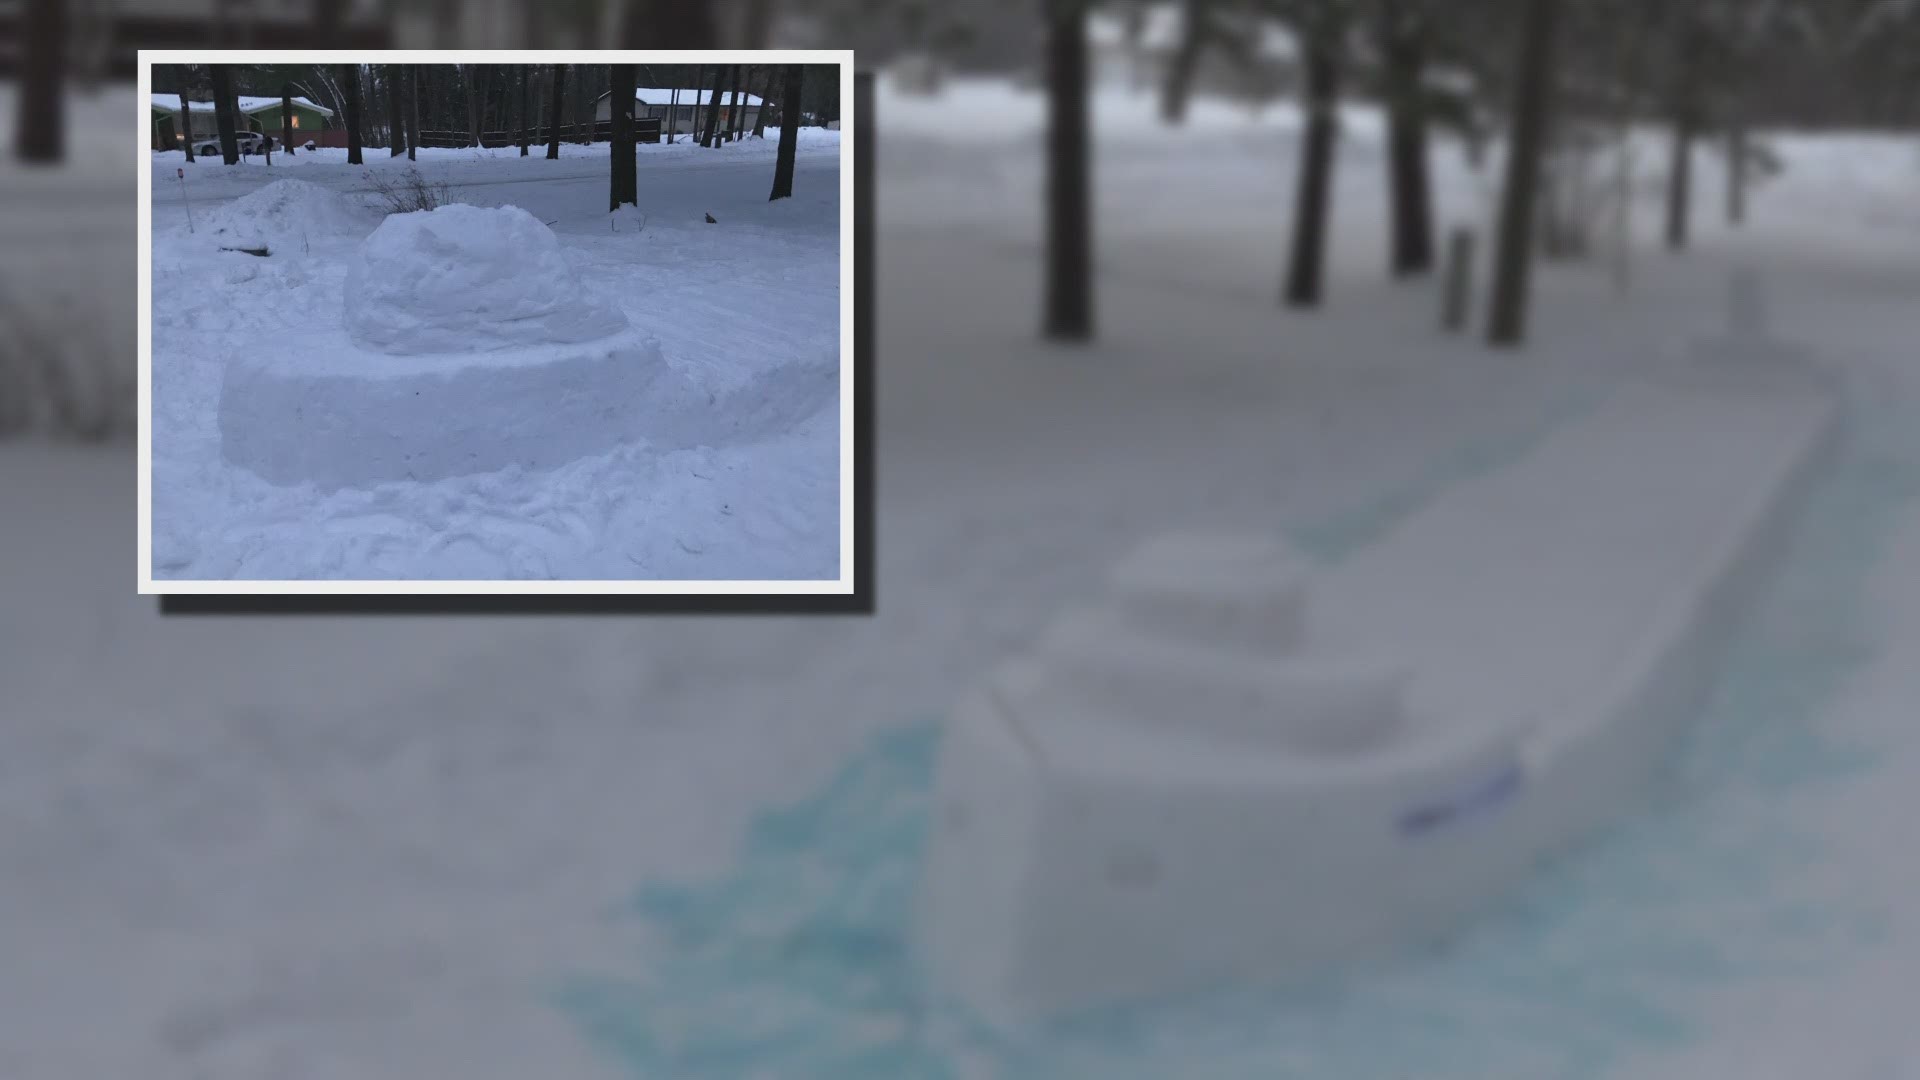 Fran Kantar has been fascinated with the Edmund Fitzgerald since it sank in 1975. She decided recently to sculpt it with snow in her front yard.